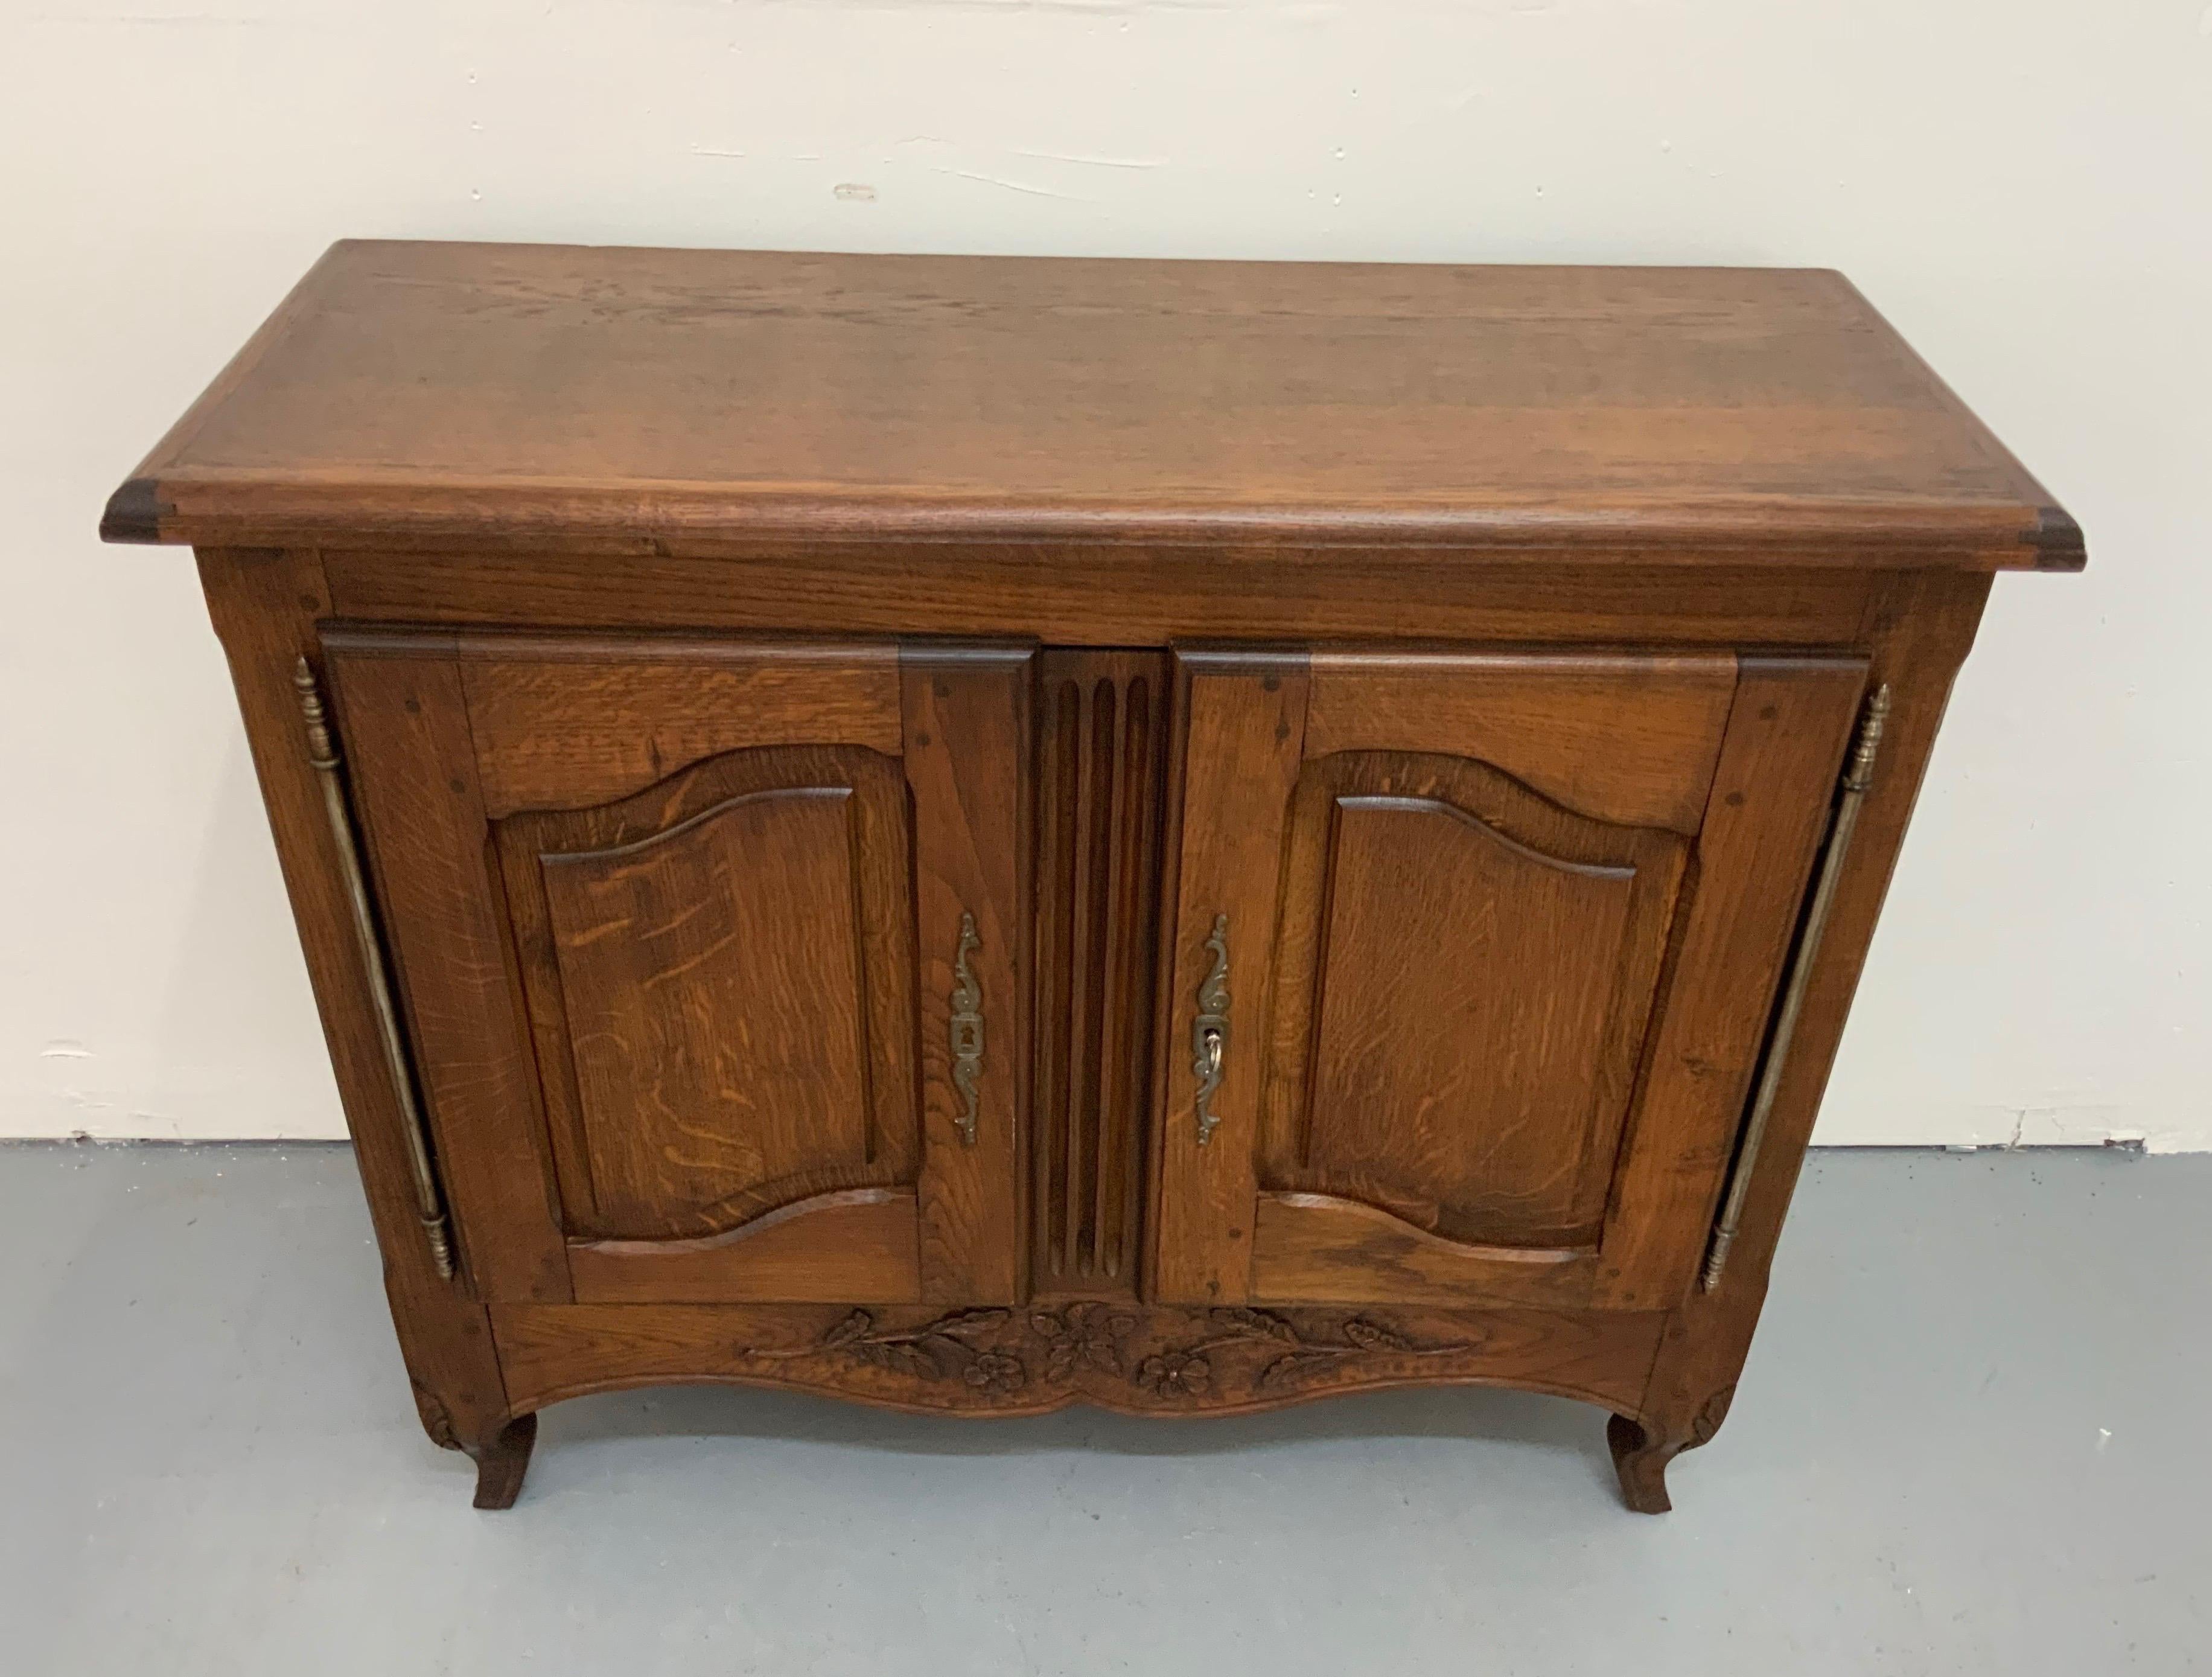 French antique small Buffet Louis XV style with 2 doors, from 20th century made in walnut and varnished.